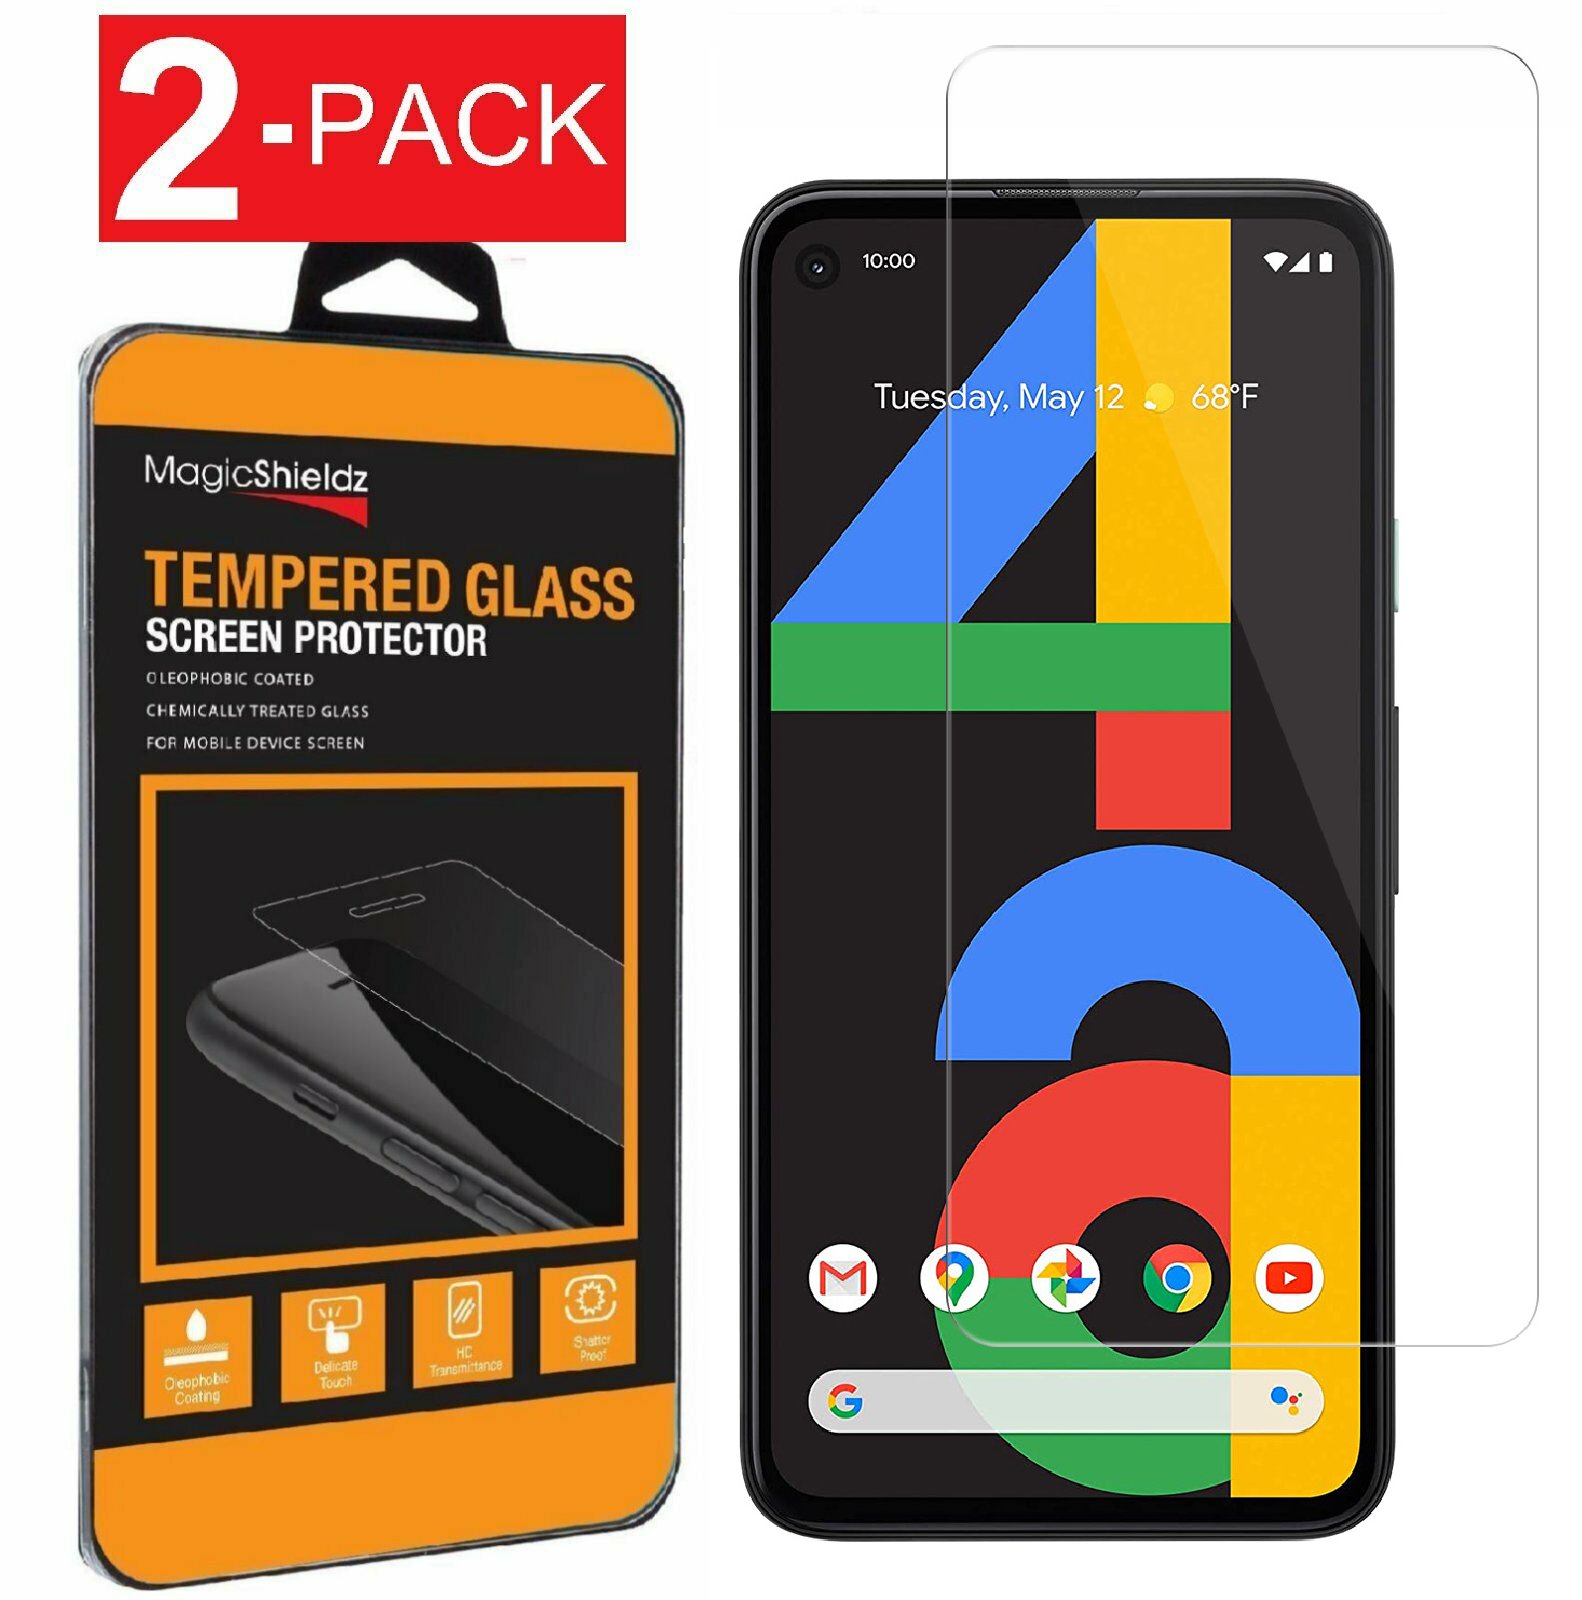 2-pack Premium Tempered Glass Screen Protector for Google Pixel 4a for sale online 